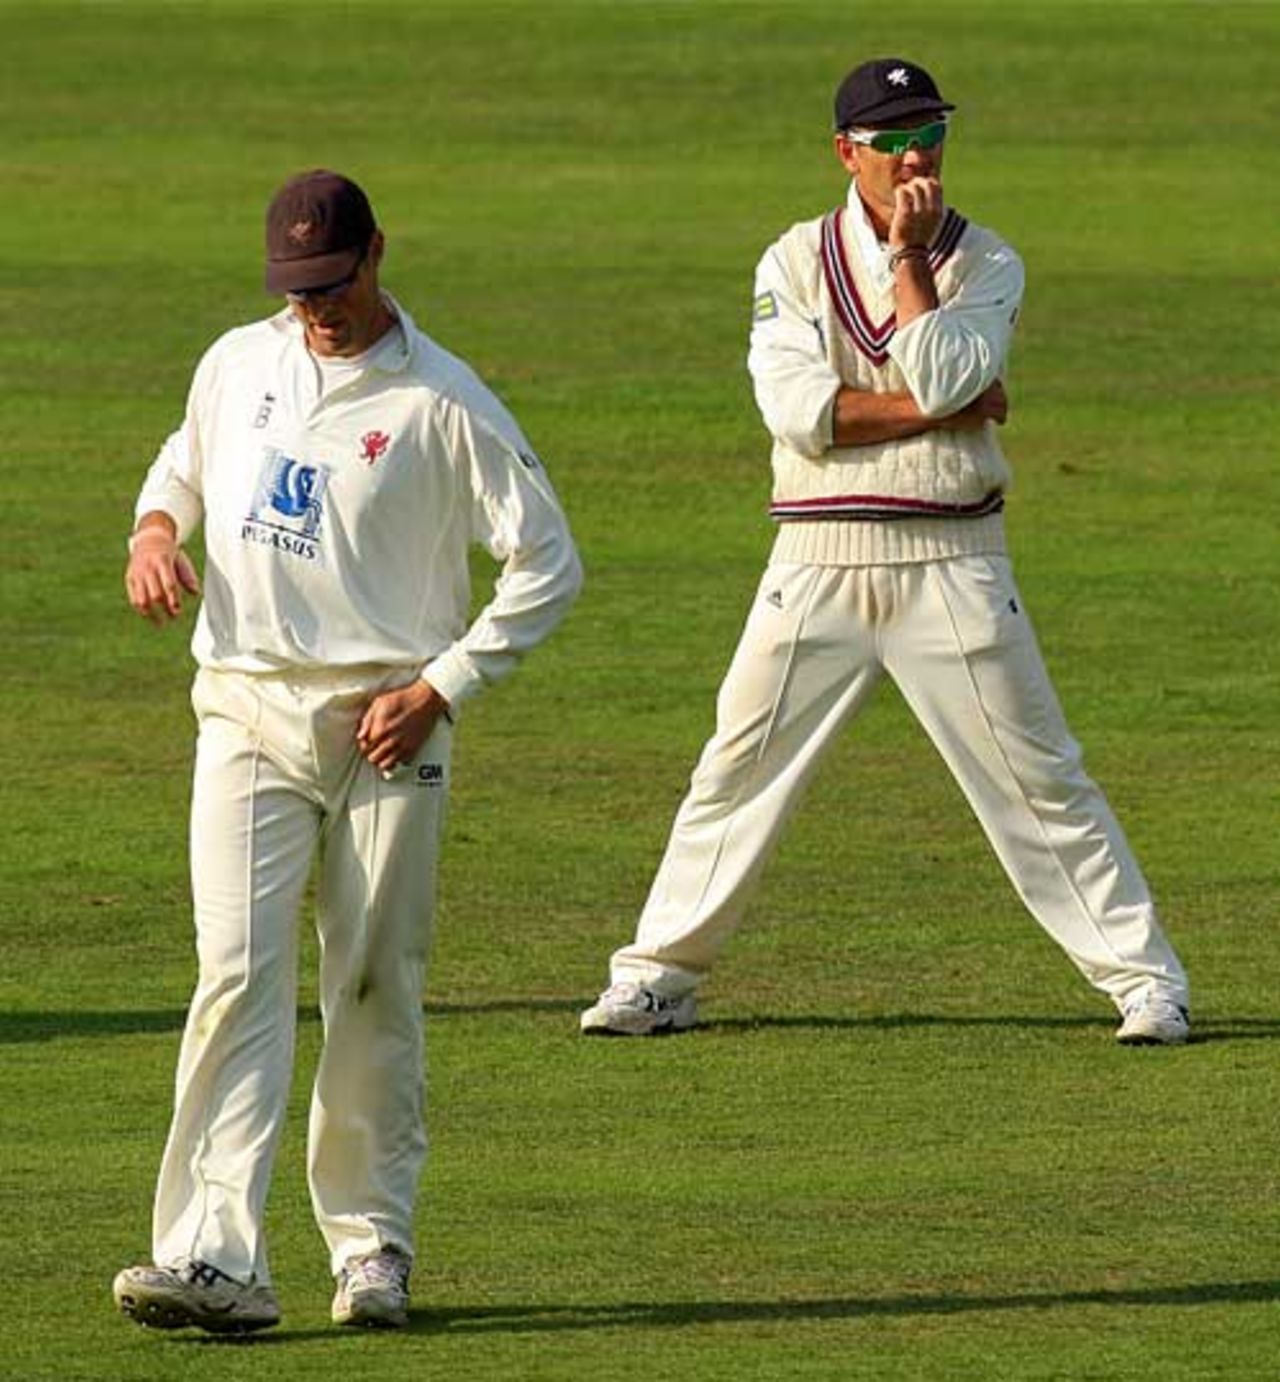 Plenty to think about: it was a tough day for Justin Langer at Taunton, Somerset v Lancashire, Taunton, September 25, 2008